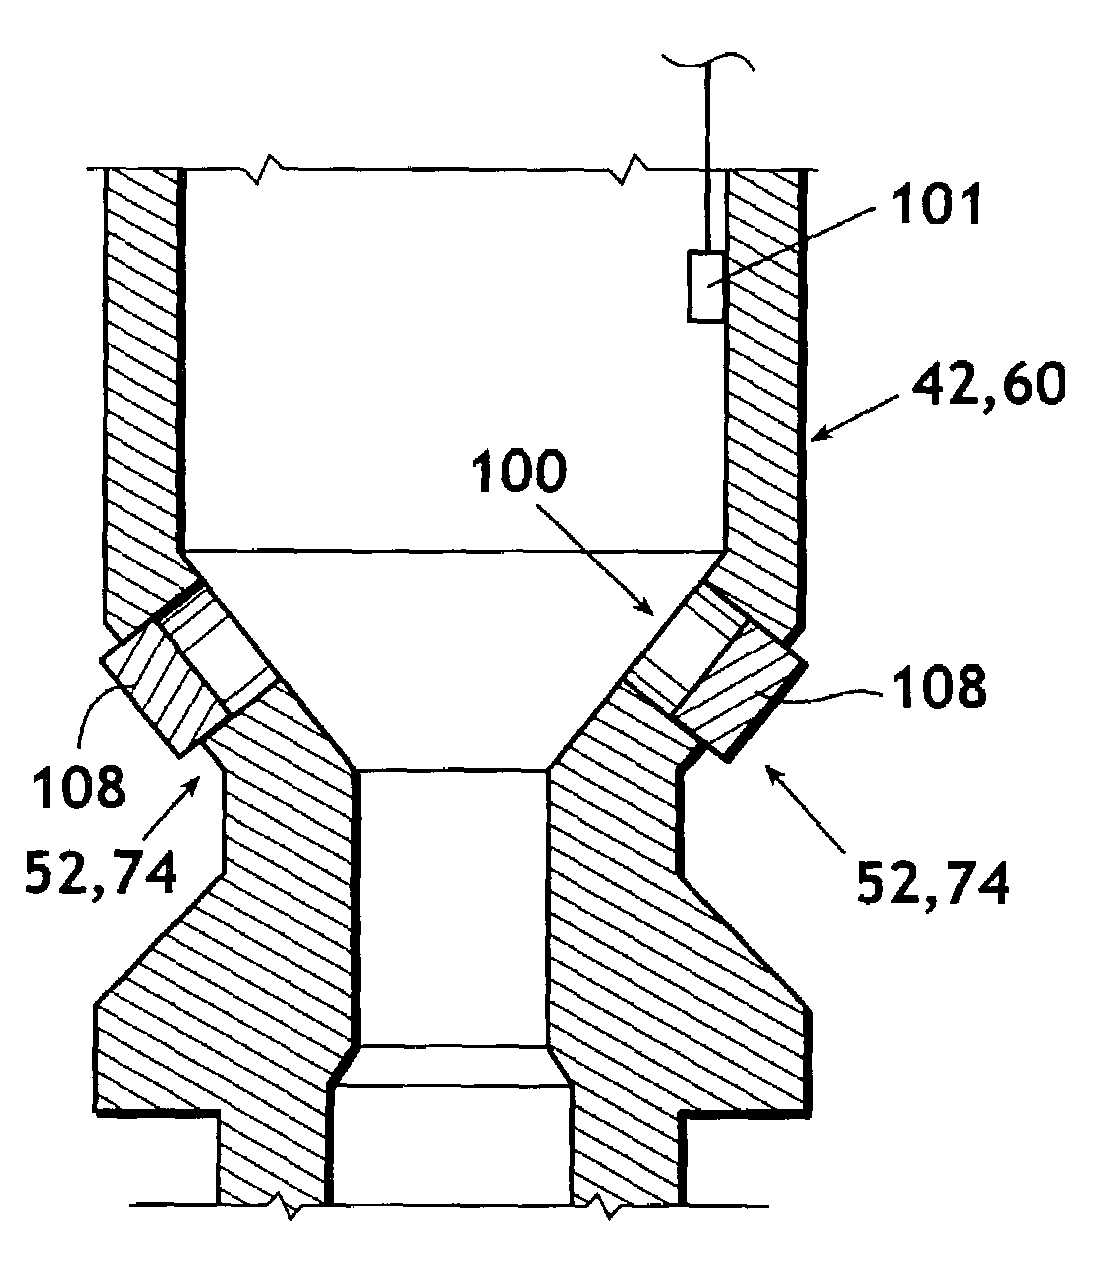 Protection scheme and method for deployment of artificial lift devices in a wellbore